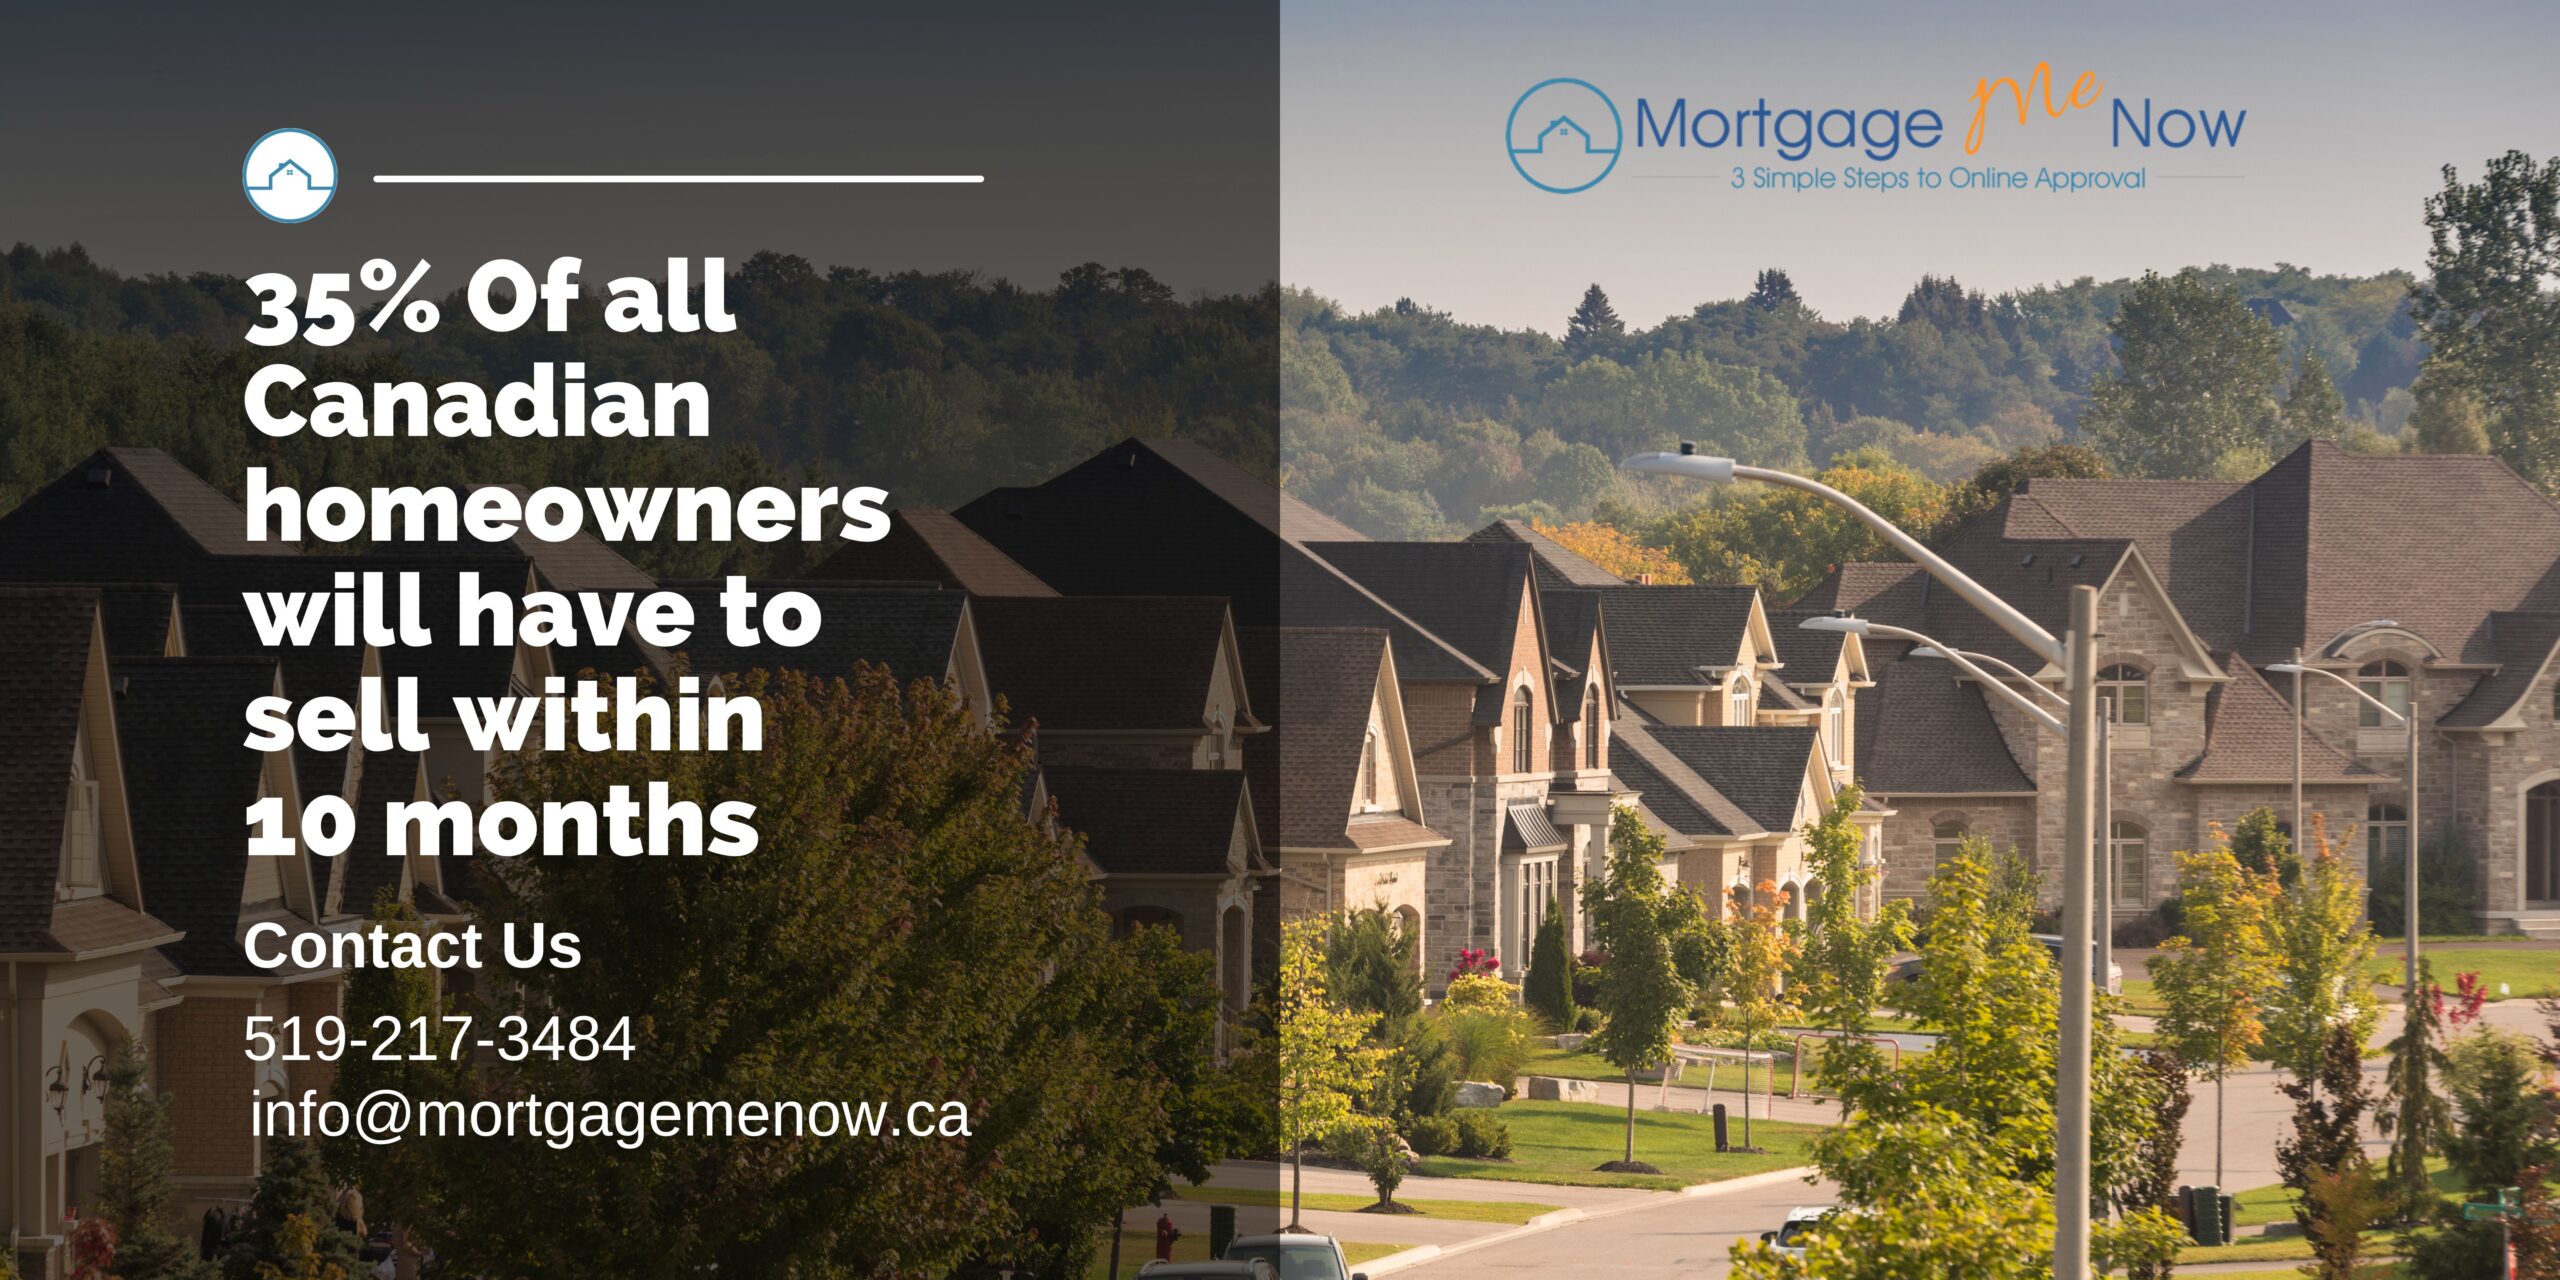 35% Of all Canadian homeowners will have to sell within 10 months